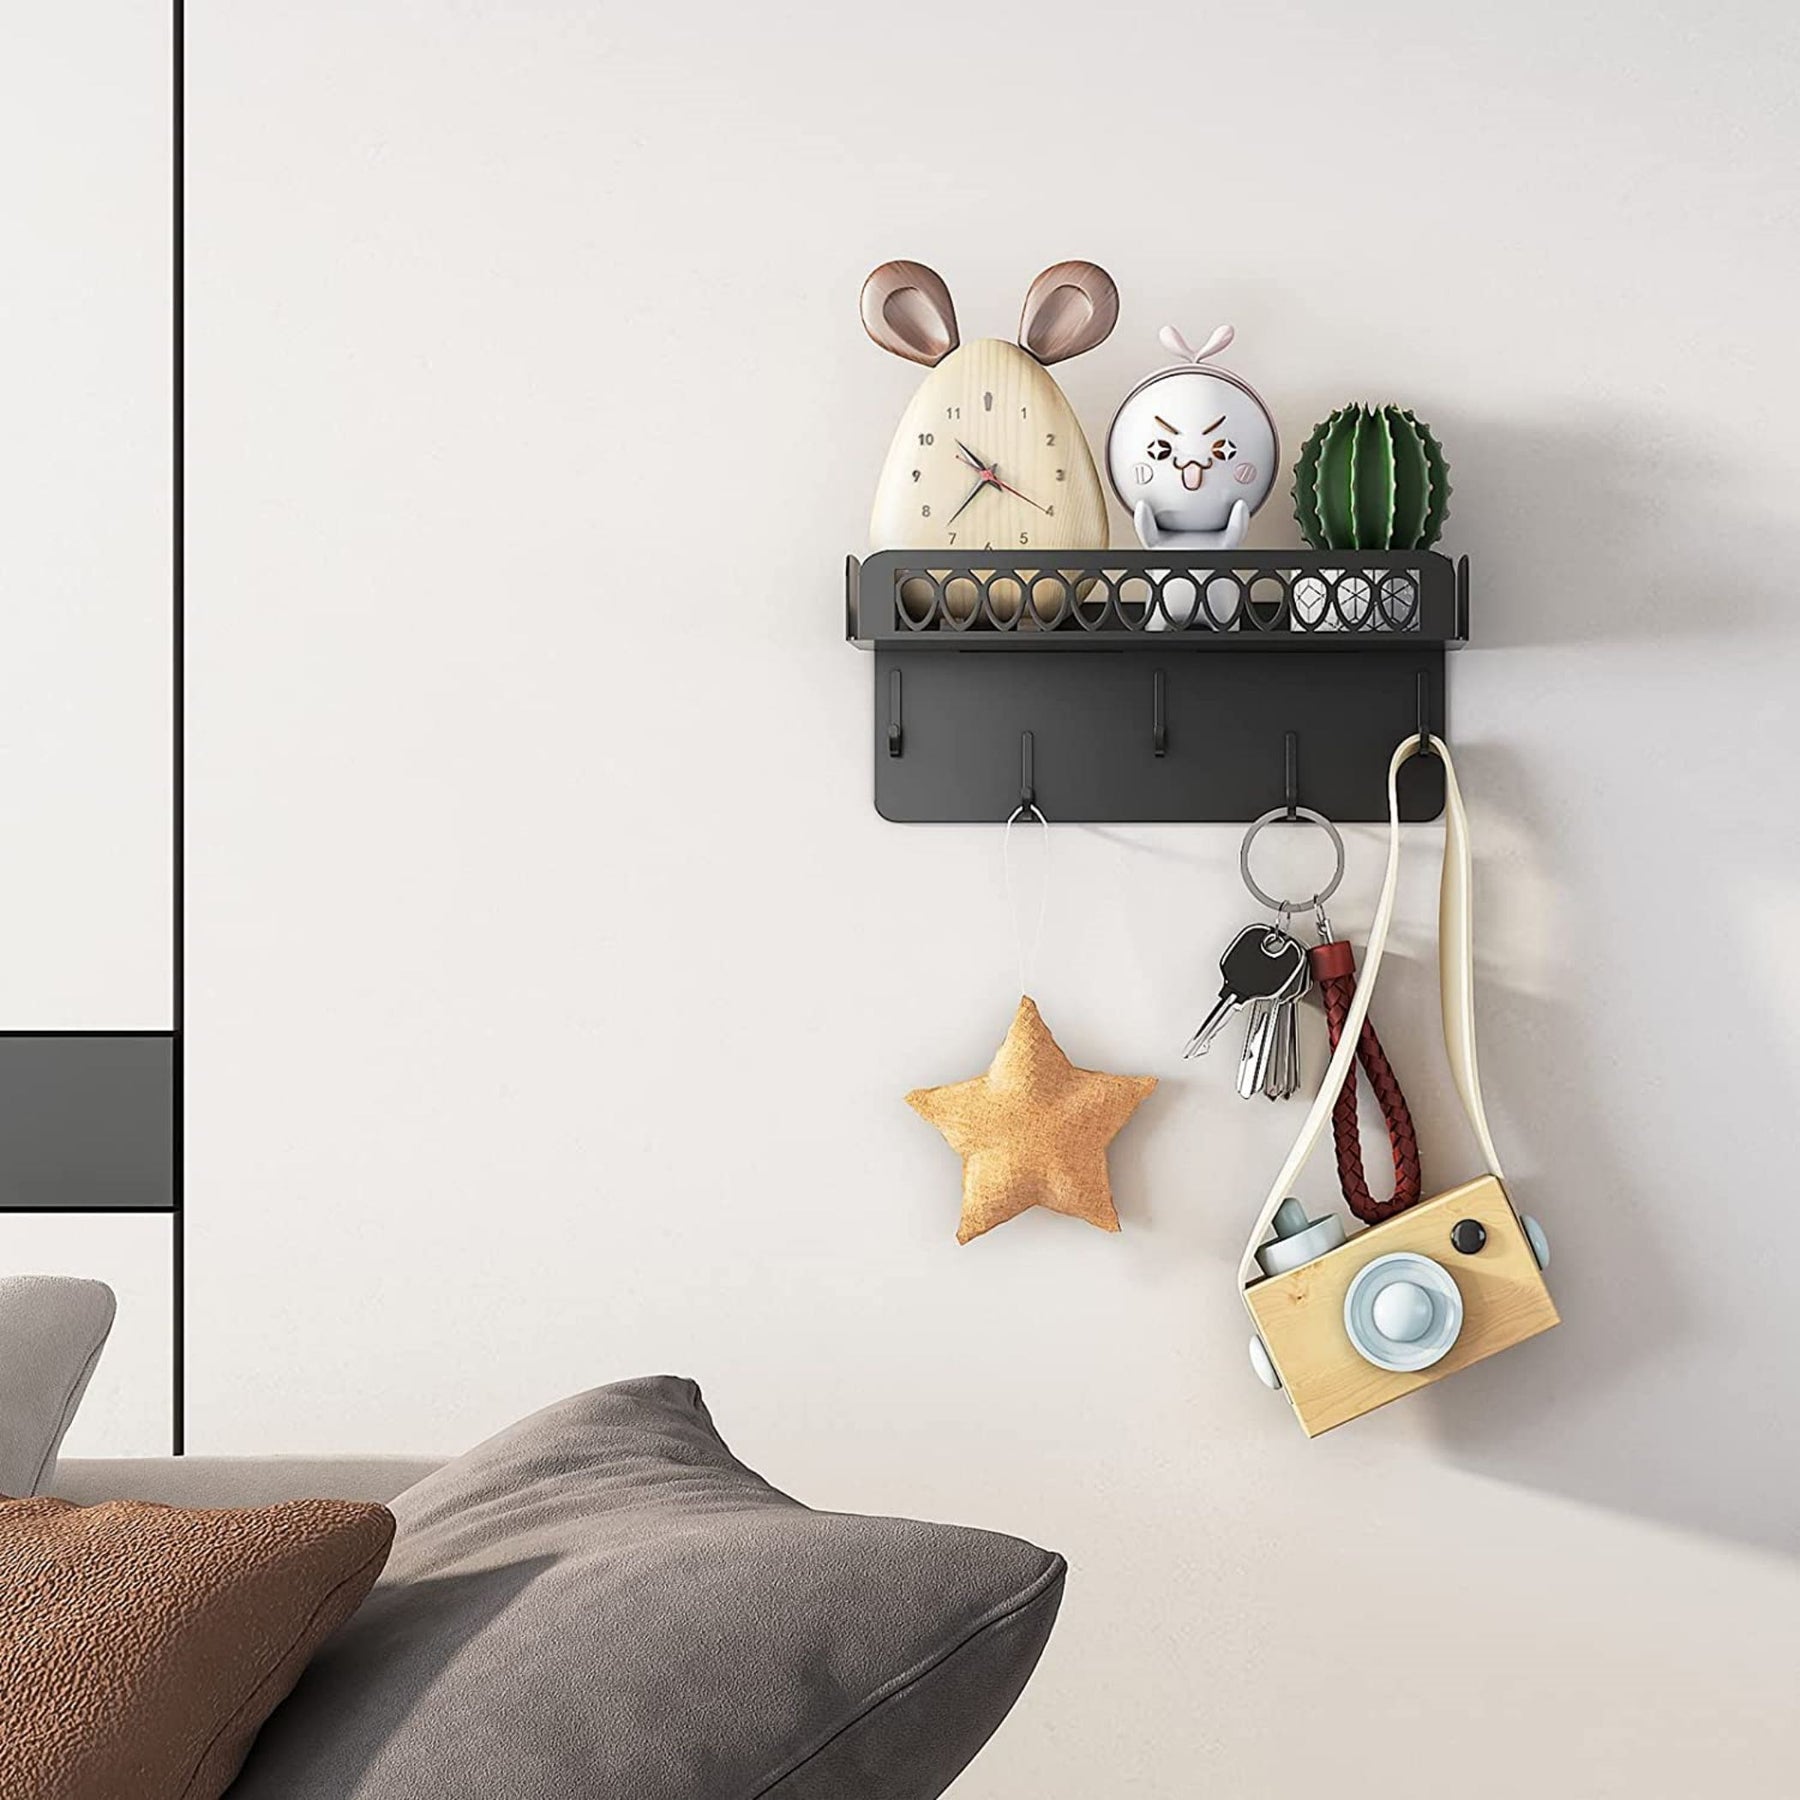 Key hook holder, mail manager and kitchen storage for wall decoration with 5 key hooks